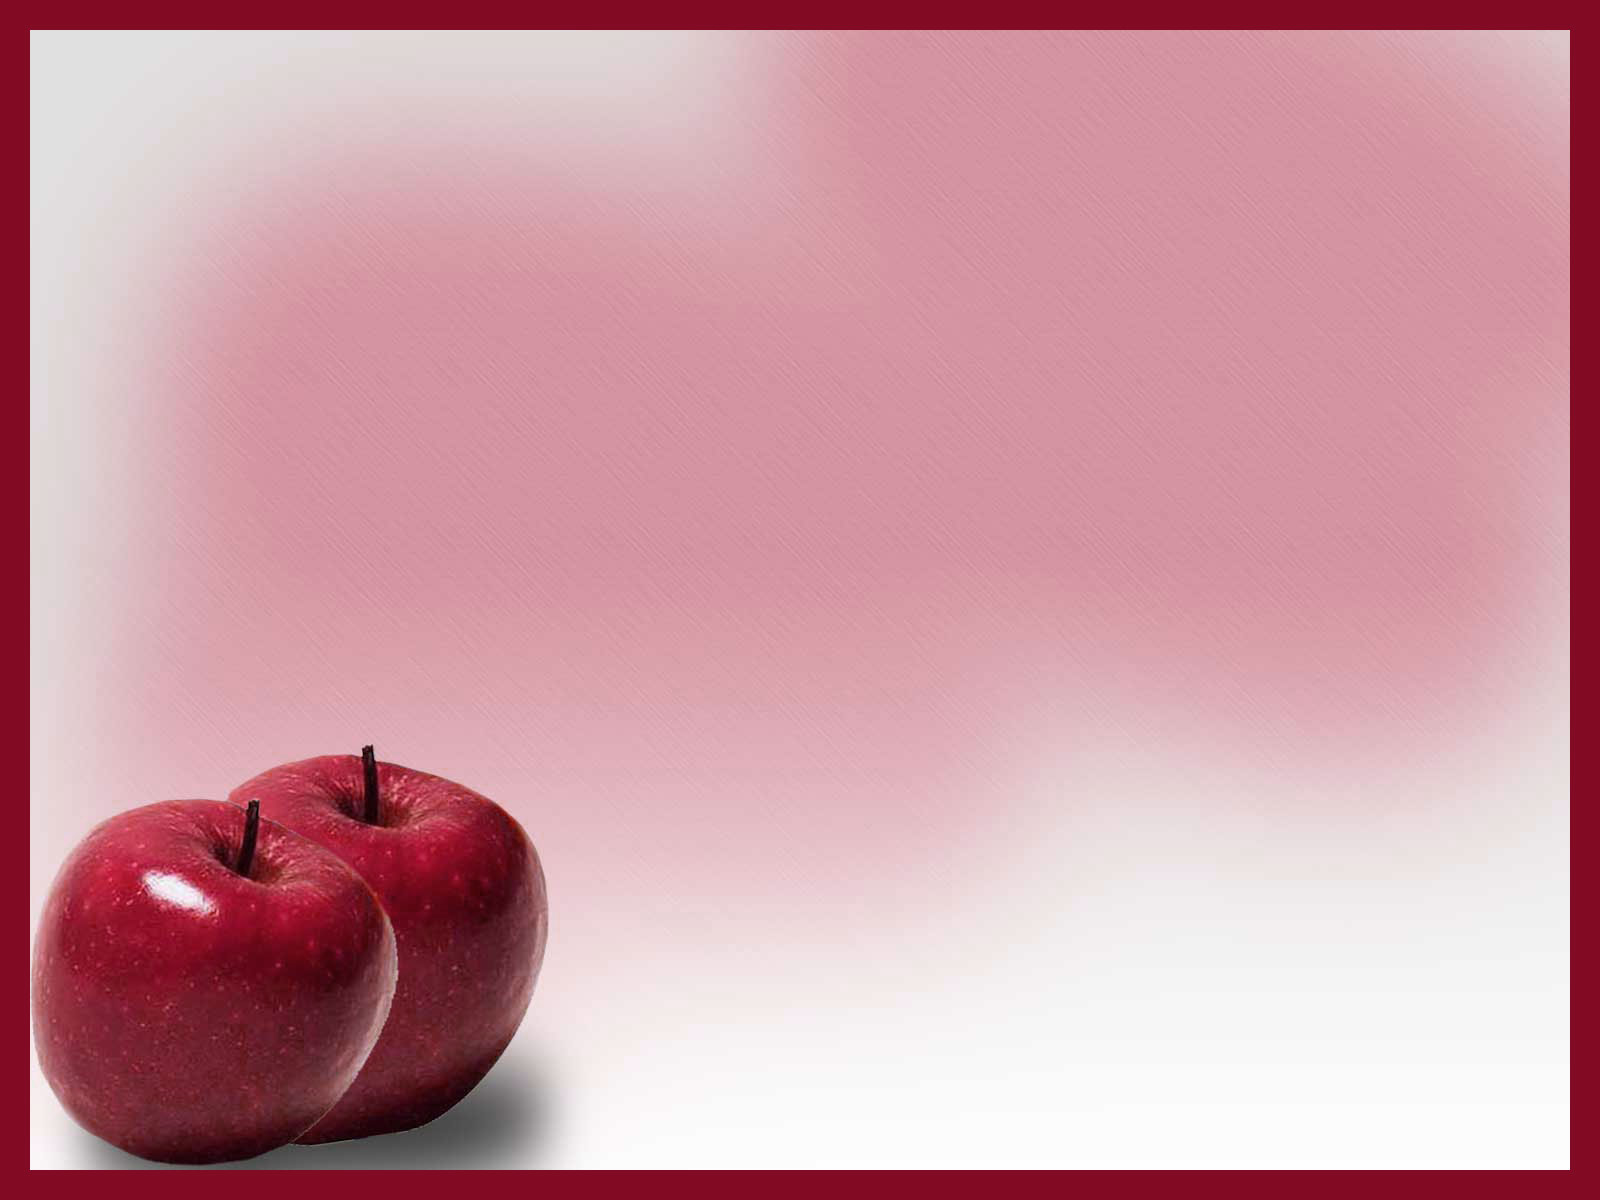 Red Apple PowerPoint background Available in 1600x1200 this